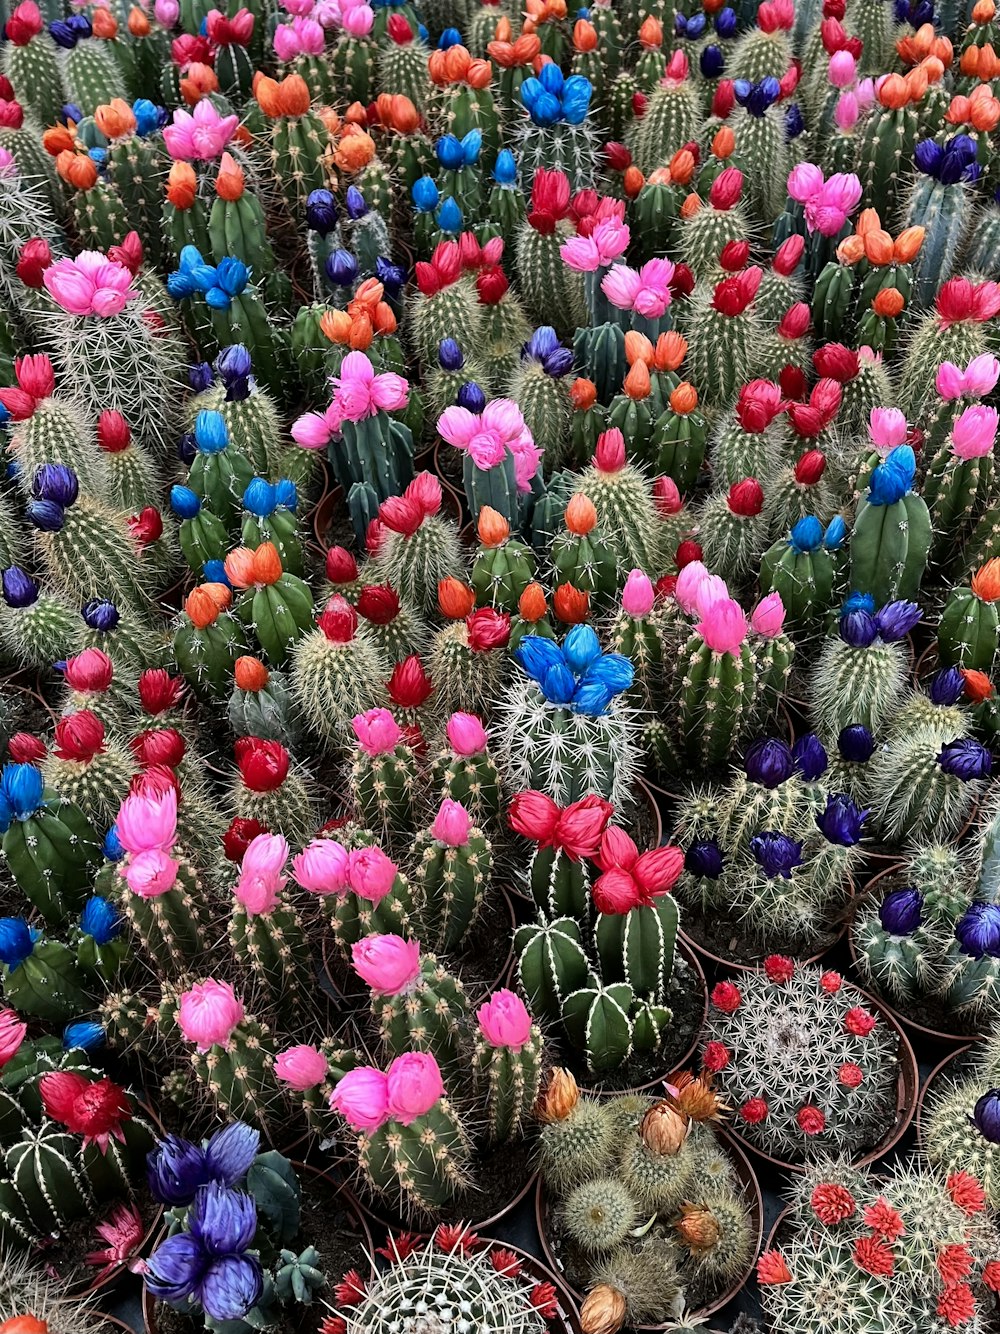 a large group of cactus plants with colorful flowers